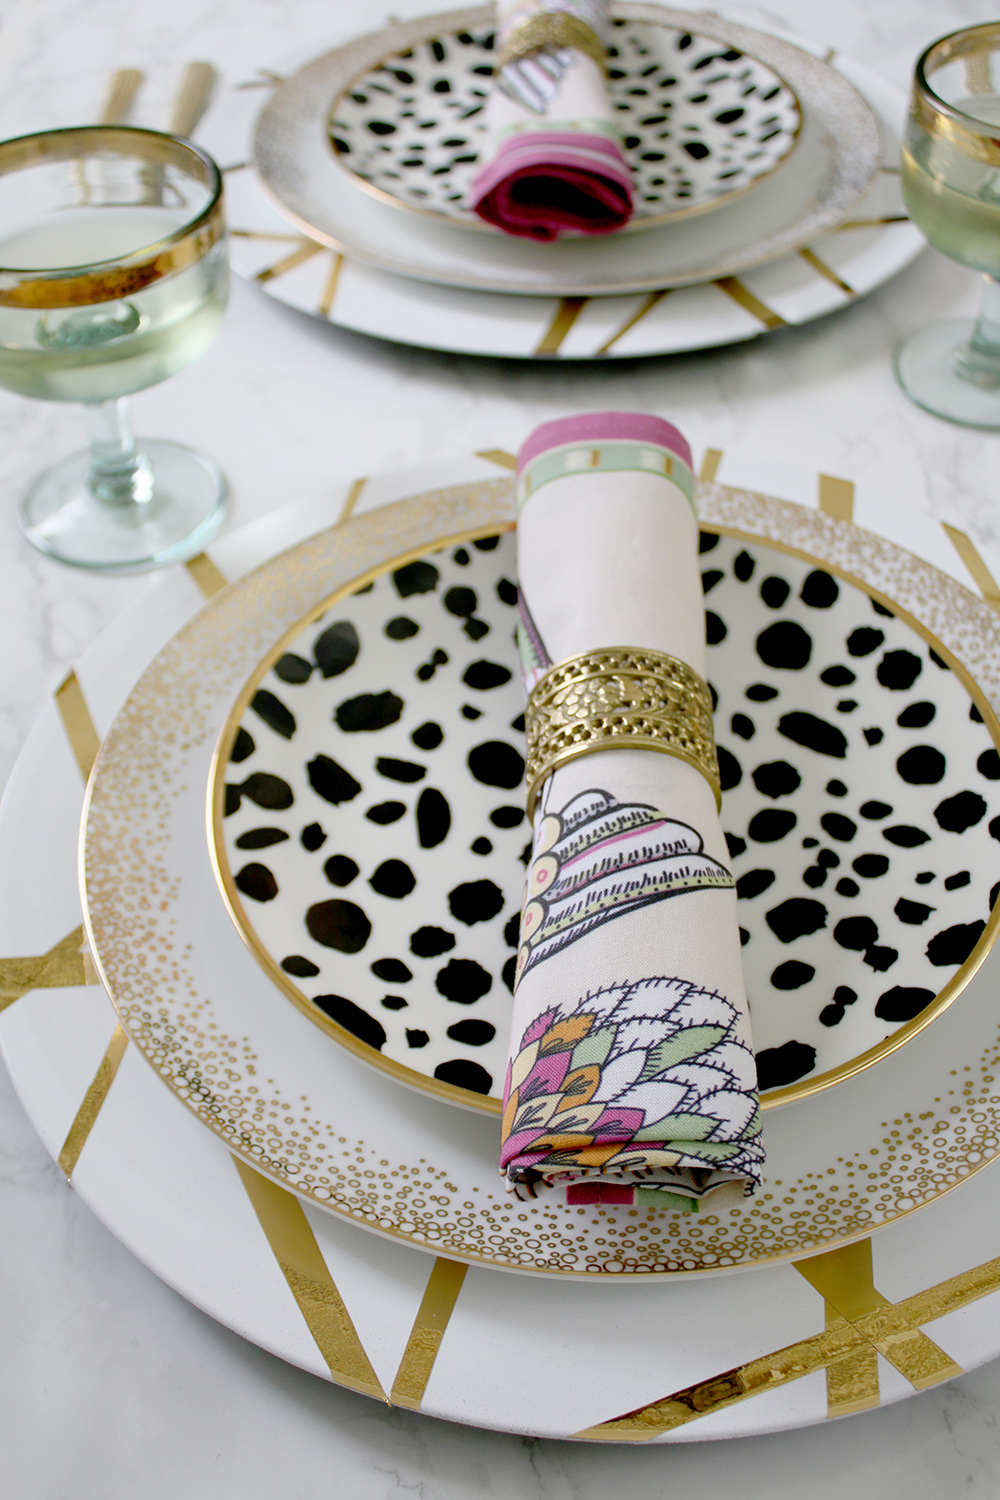 Cool DIY ideas for your home. Decorative gold charger plates by Swoon Worthy.